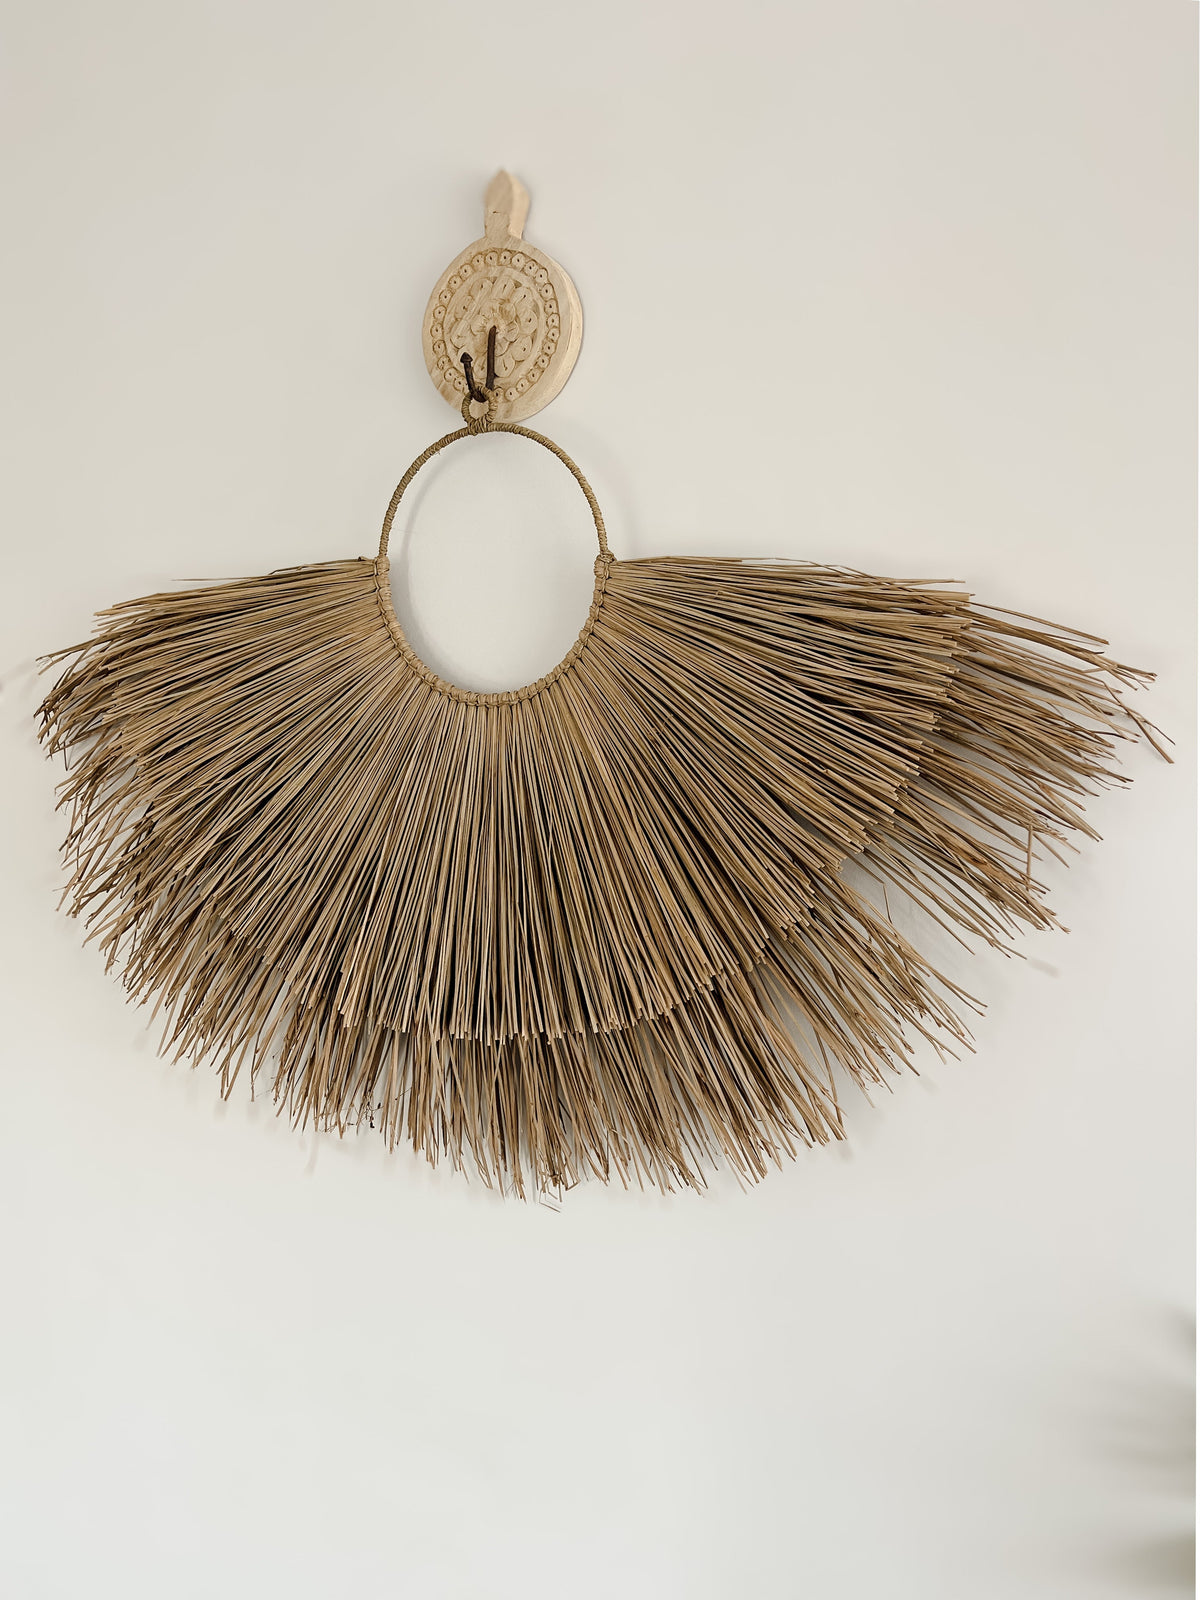 Eden Seagrass Wall Hanging Wall Hanging Wander & Wild 